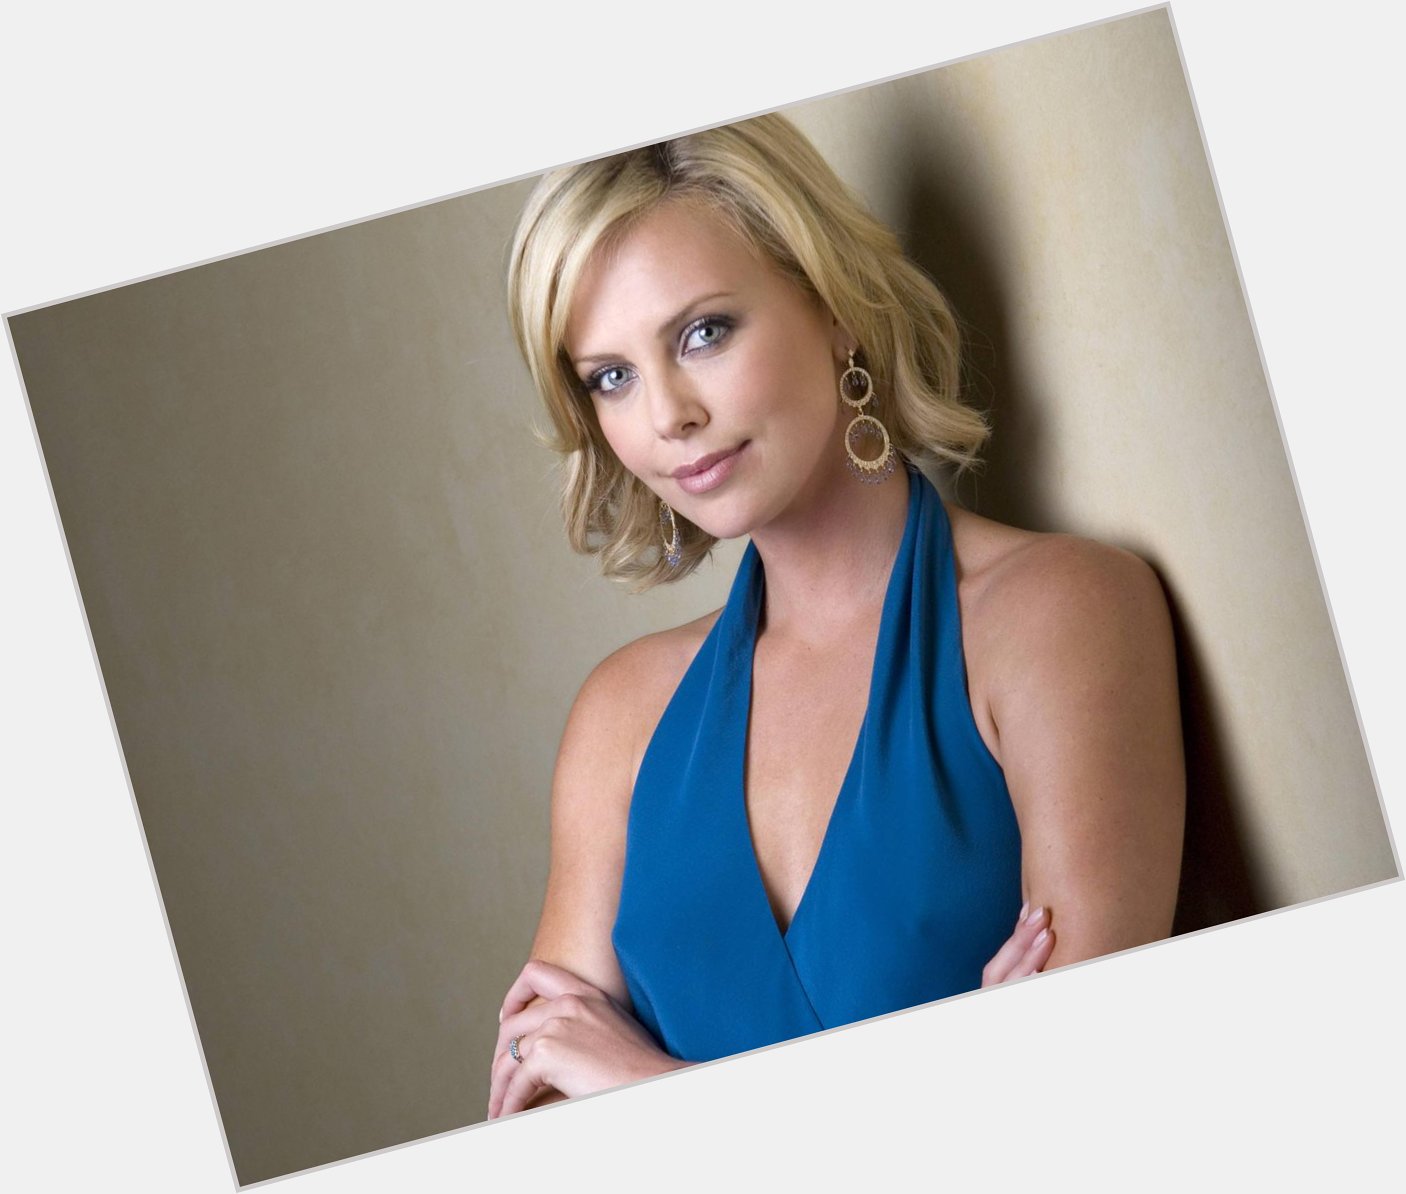 Happy Birthday, Charlize Theron! Born 7 August 1975 in Benoni, South Africa 